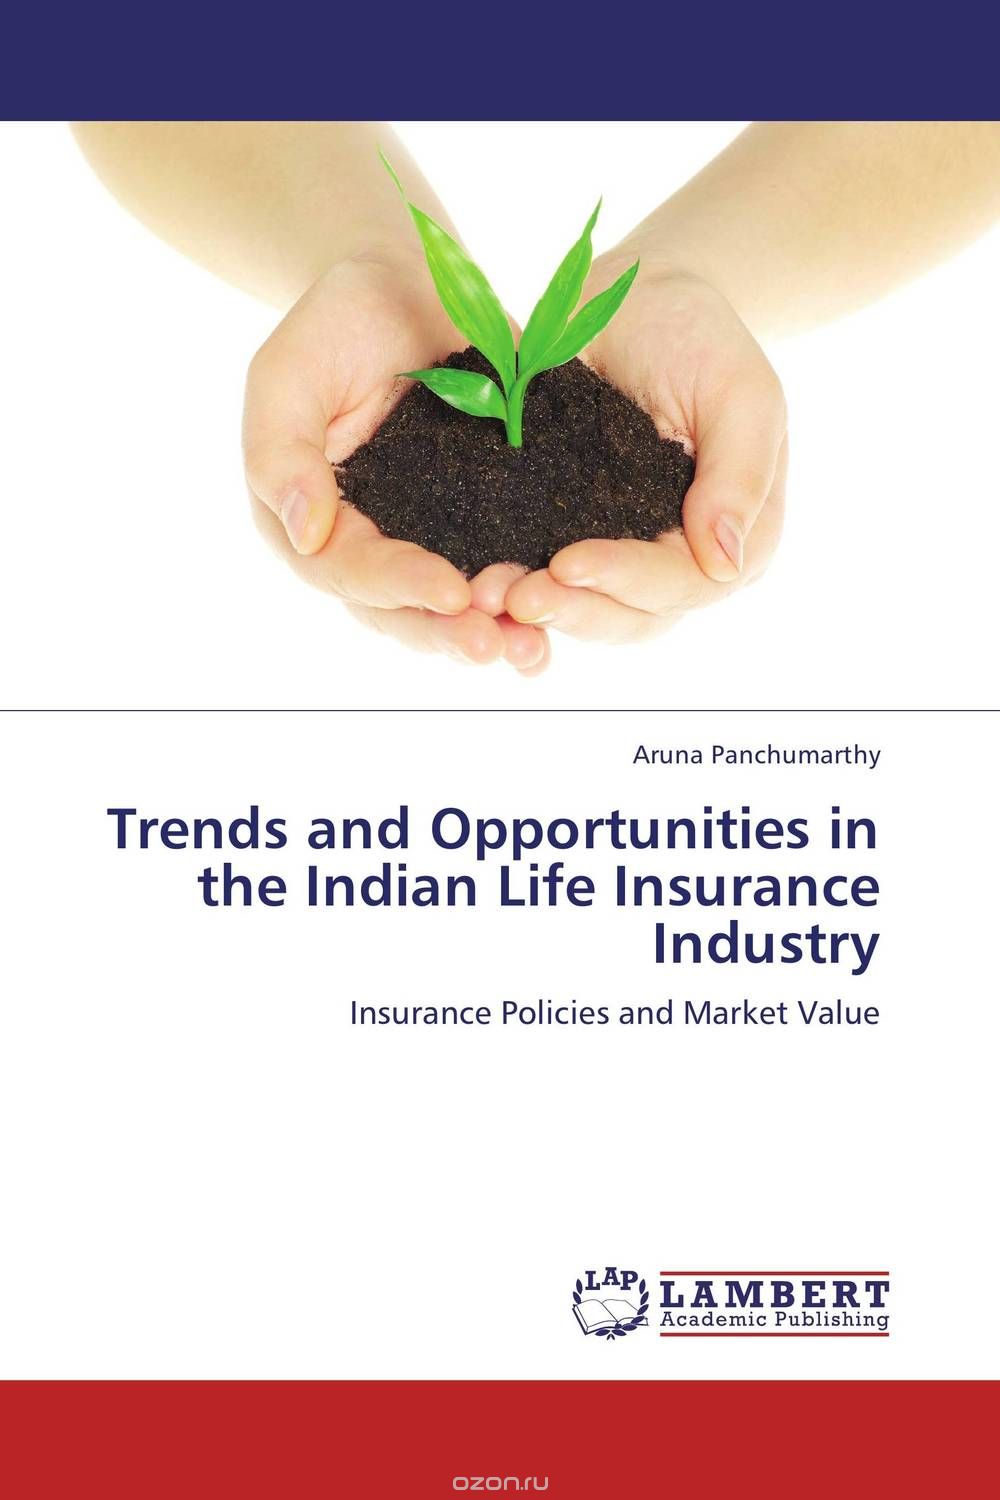 Скачать книгу "Trends and Opportunities in the Indian Life Insurance Industry"